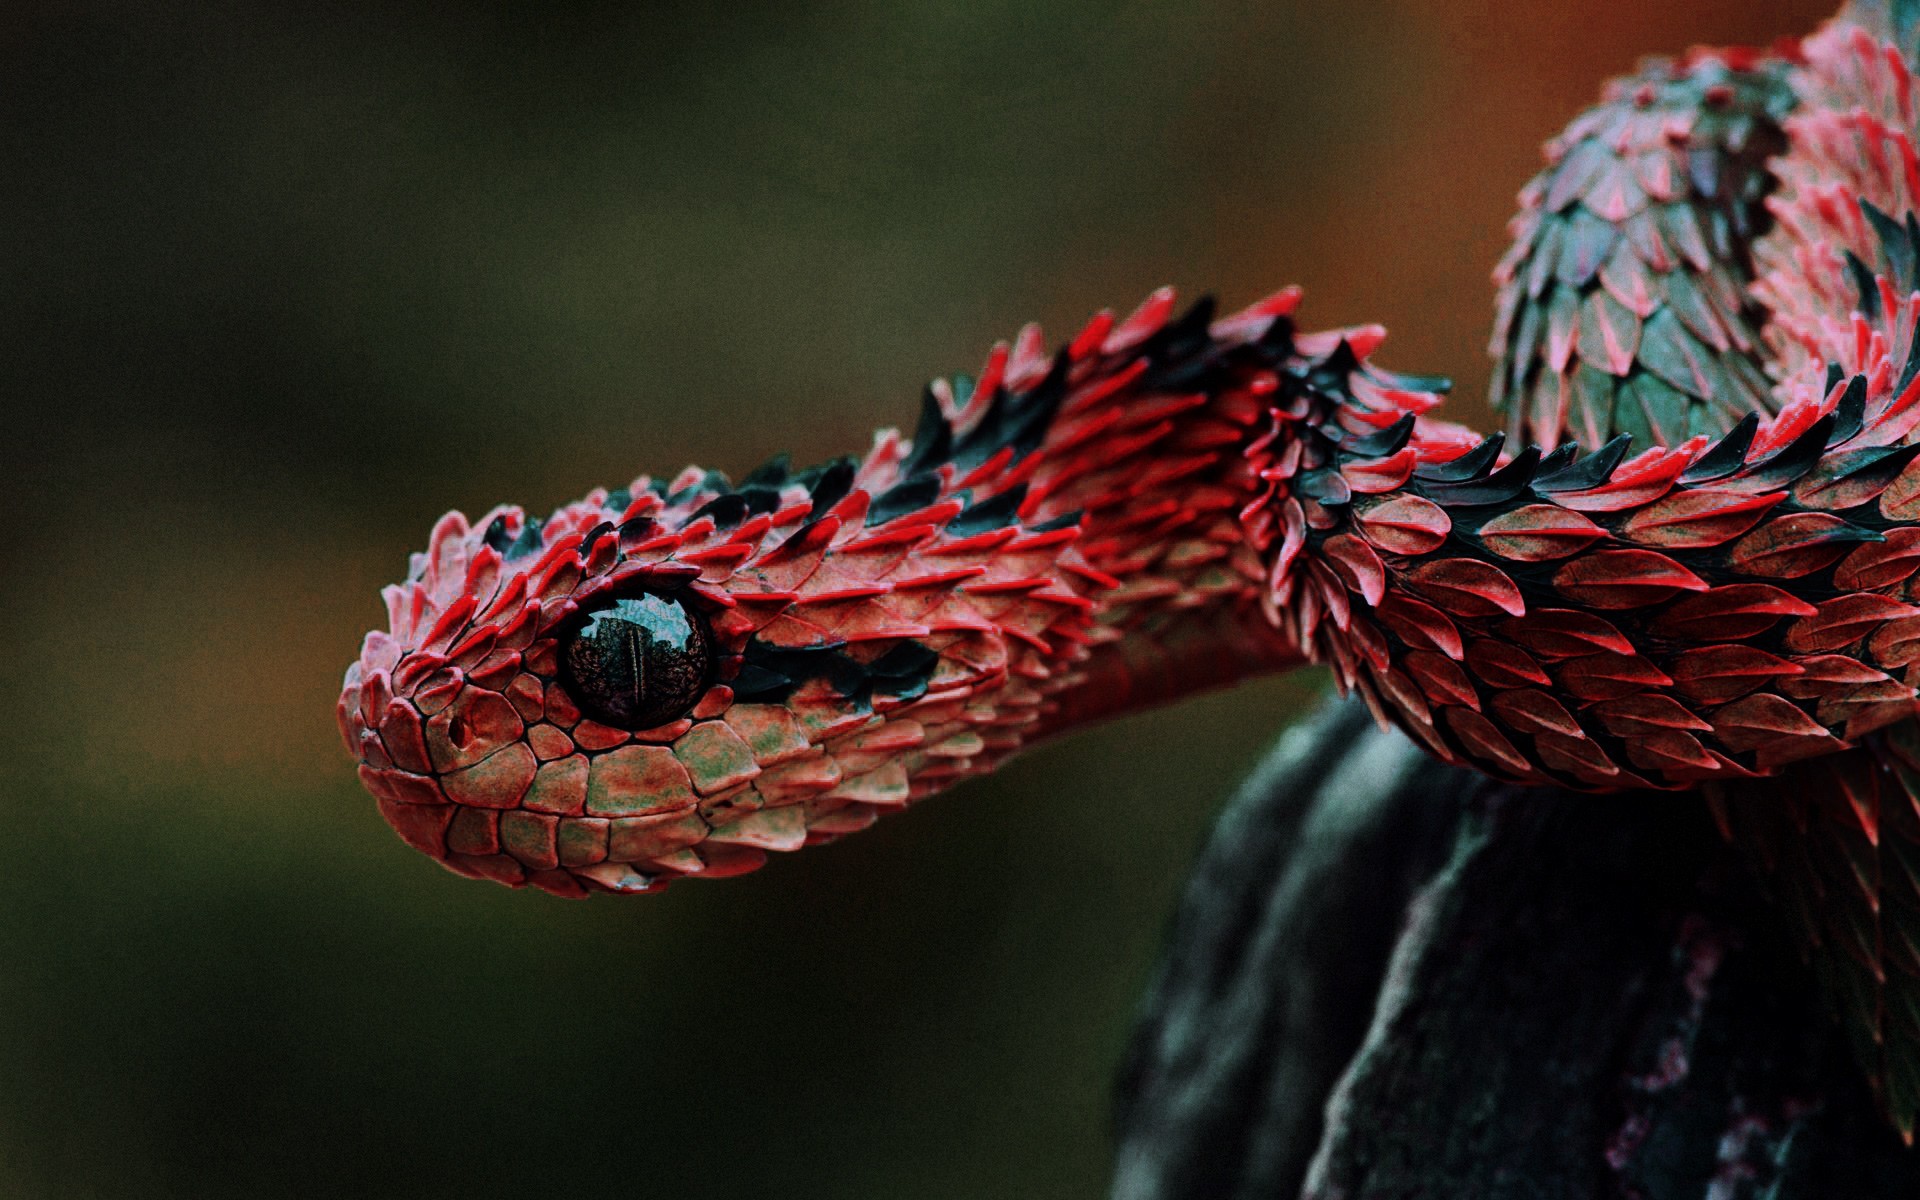 General 1920x1200 vipers reptiles snake red Lizard scales animals animal eyes closeup nature